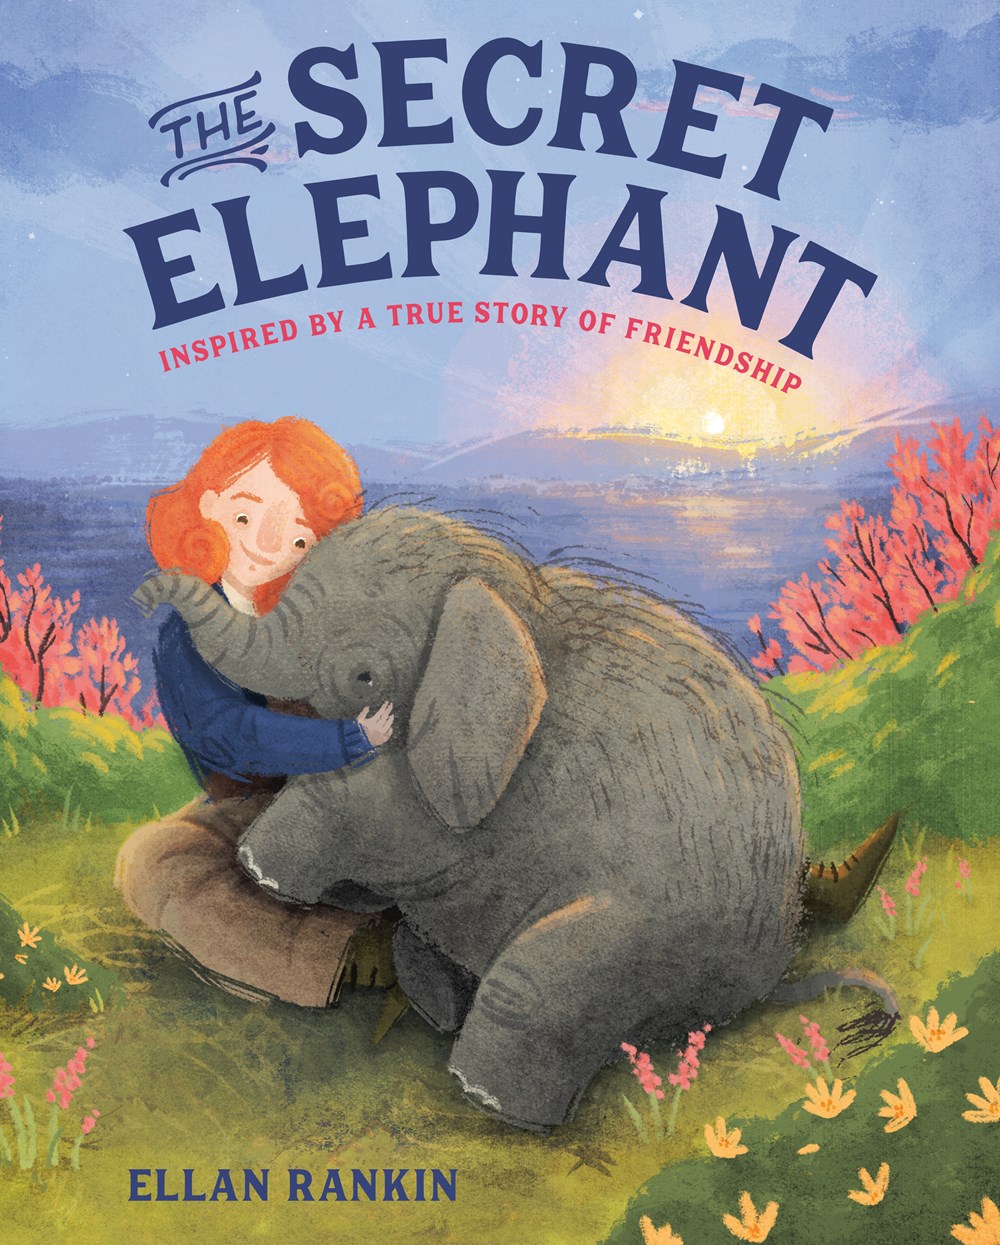 Giveaway: THE SECRET ELEPHANT: Inspired by a True Story of Friendship (Ellan Rankin)~ US ONLY!